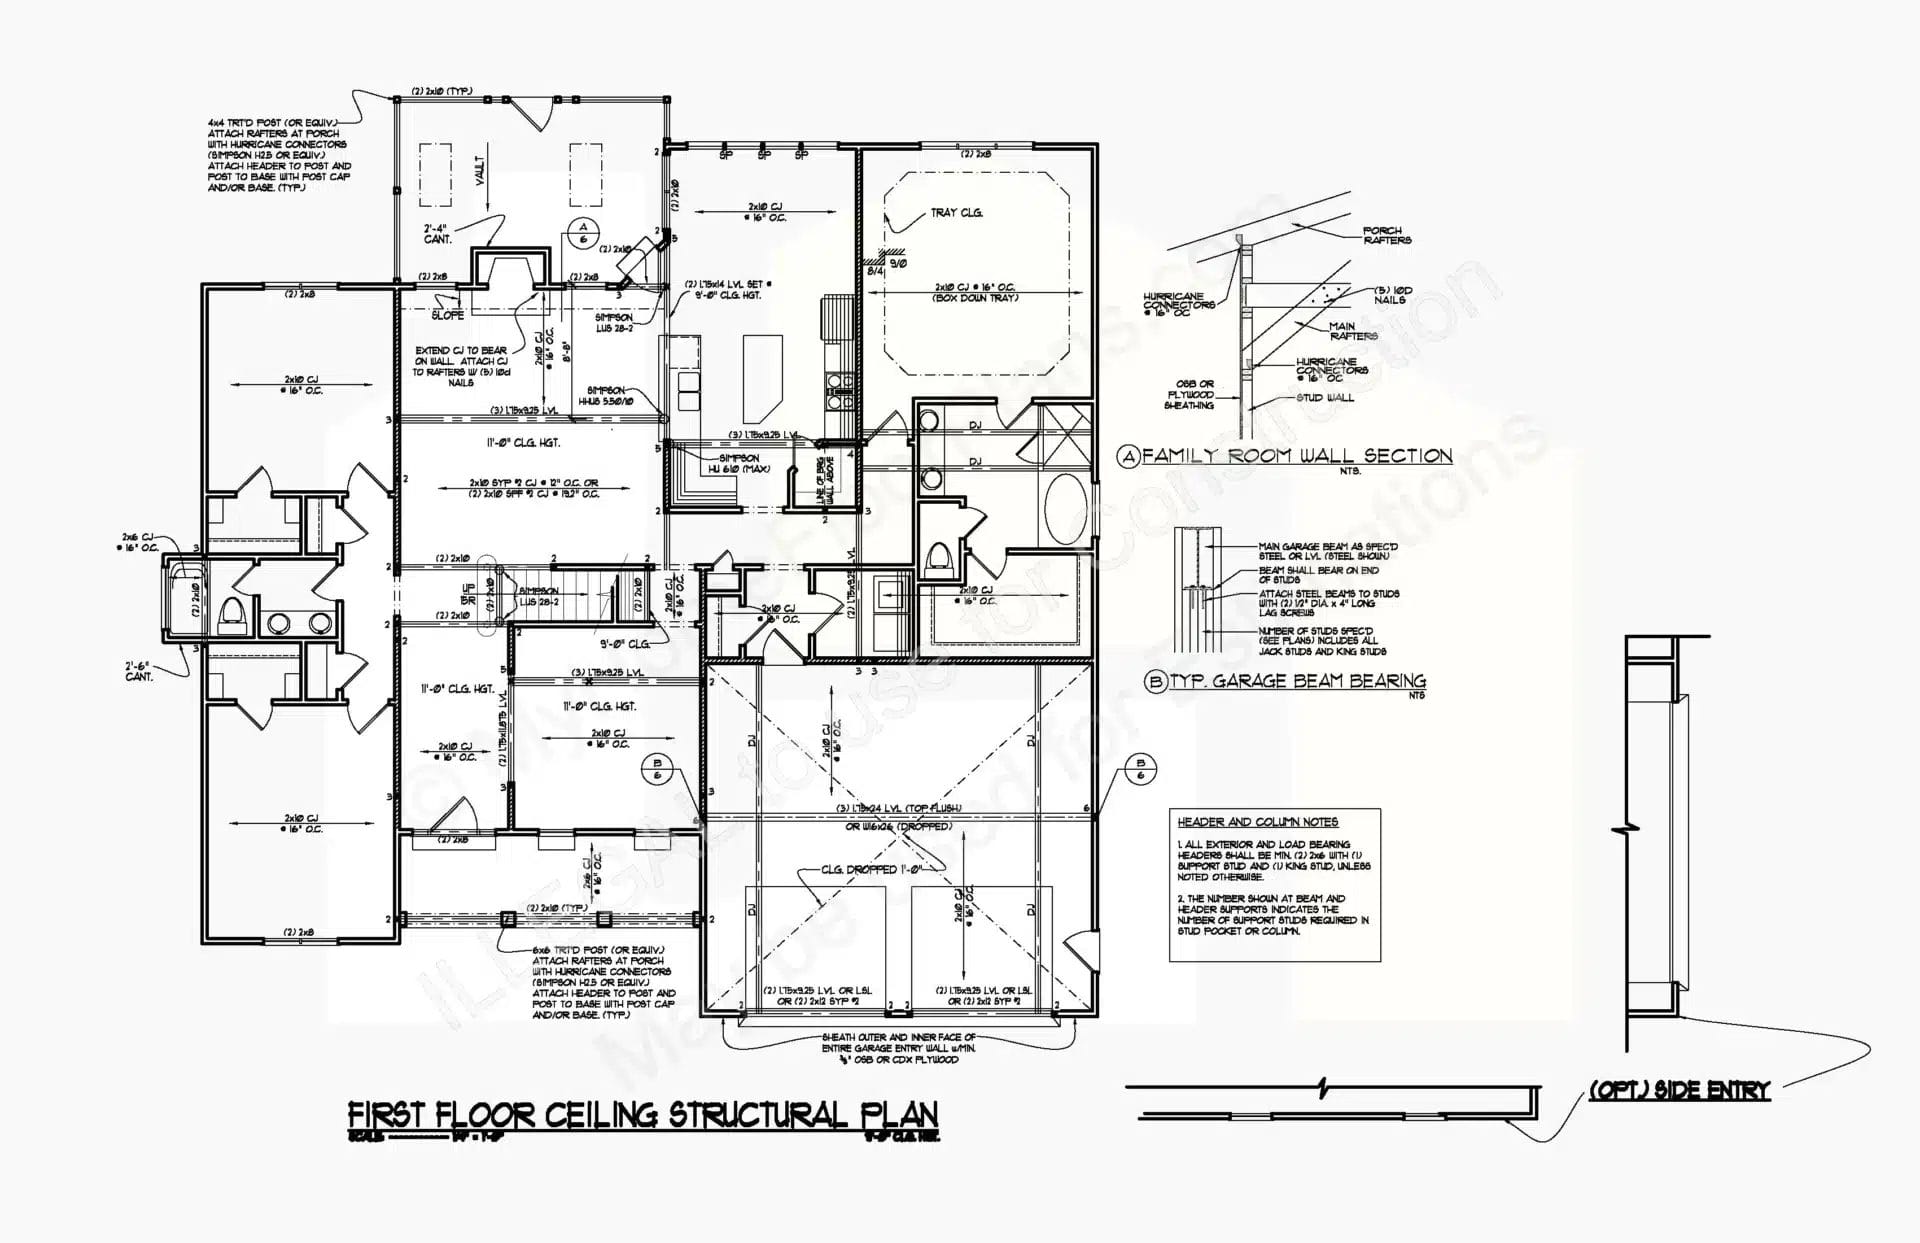 Detailed architectural blueprint of a first-floor ceiling structural plan for a home, featuring labeled rooms, measurements, and construction notes. The 12-2289 includes a layout for lighting, room placement, and cross-section details.